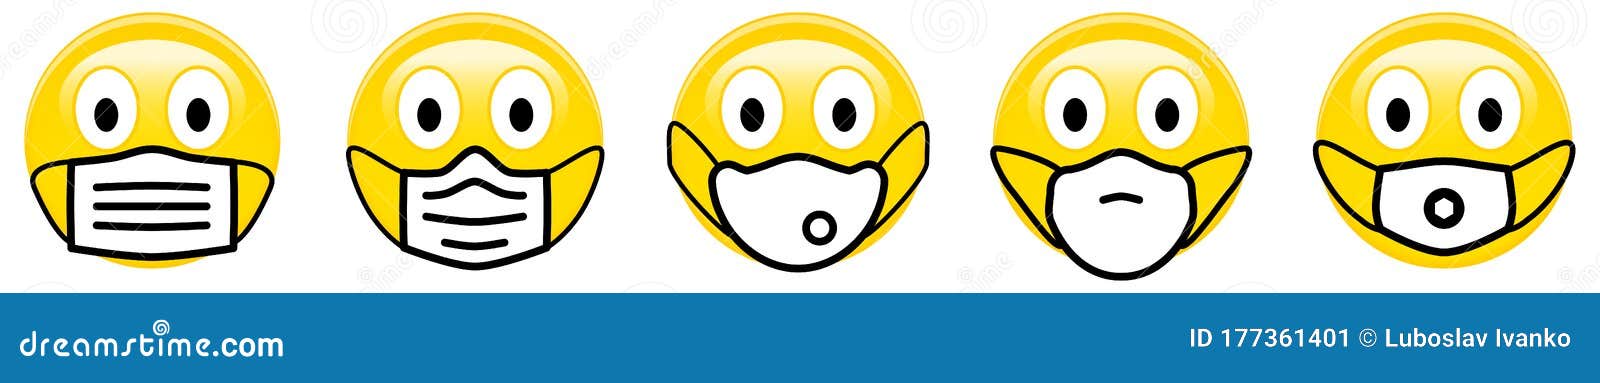 Download Yellow Face Mask Stock Illustrations 4 719 Yellow Face Mask Stock Illustrations Vectors Clipart Dreamstime Yellowimages Mockups